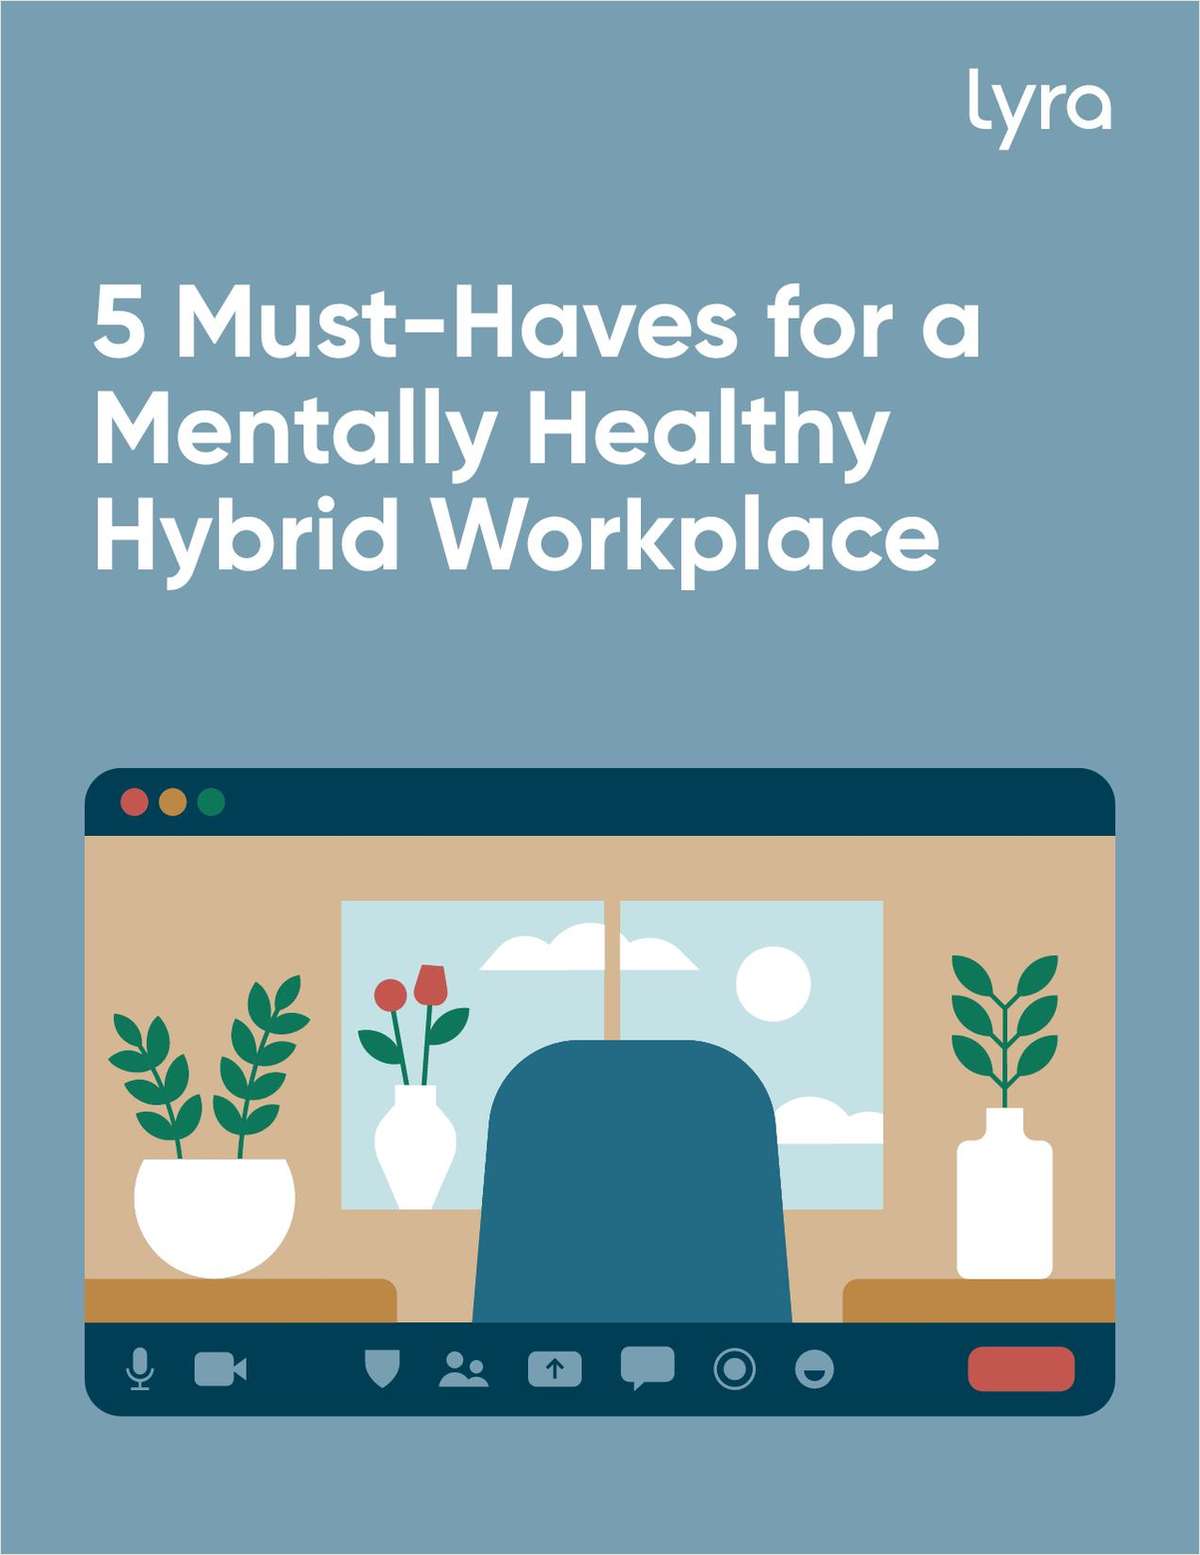 5 Must Haves for a Mentally Healthy Hybrid Workforce